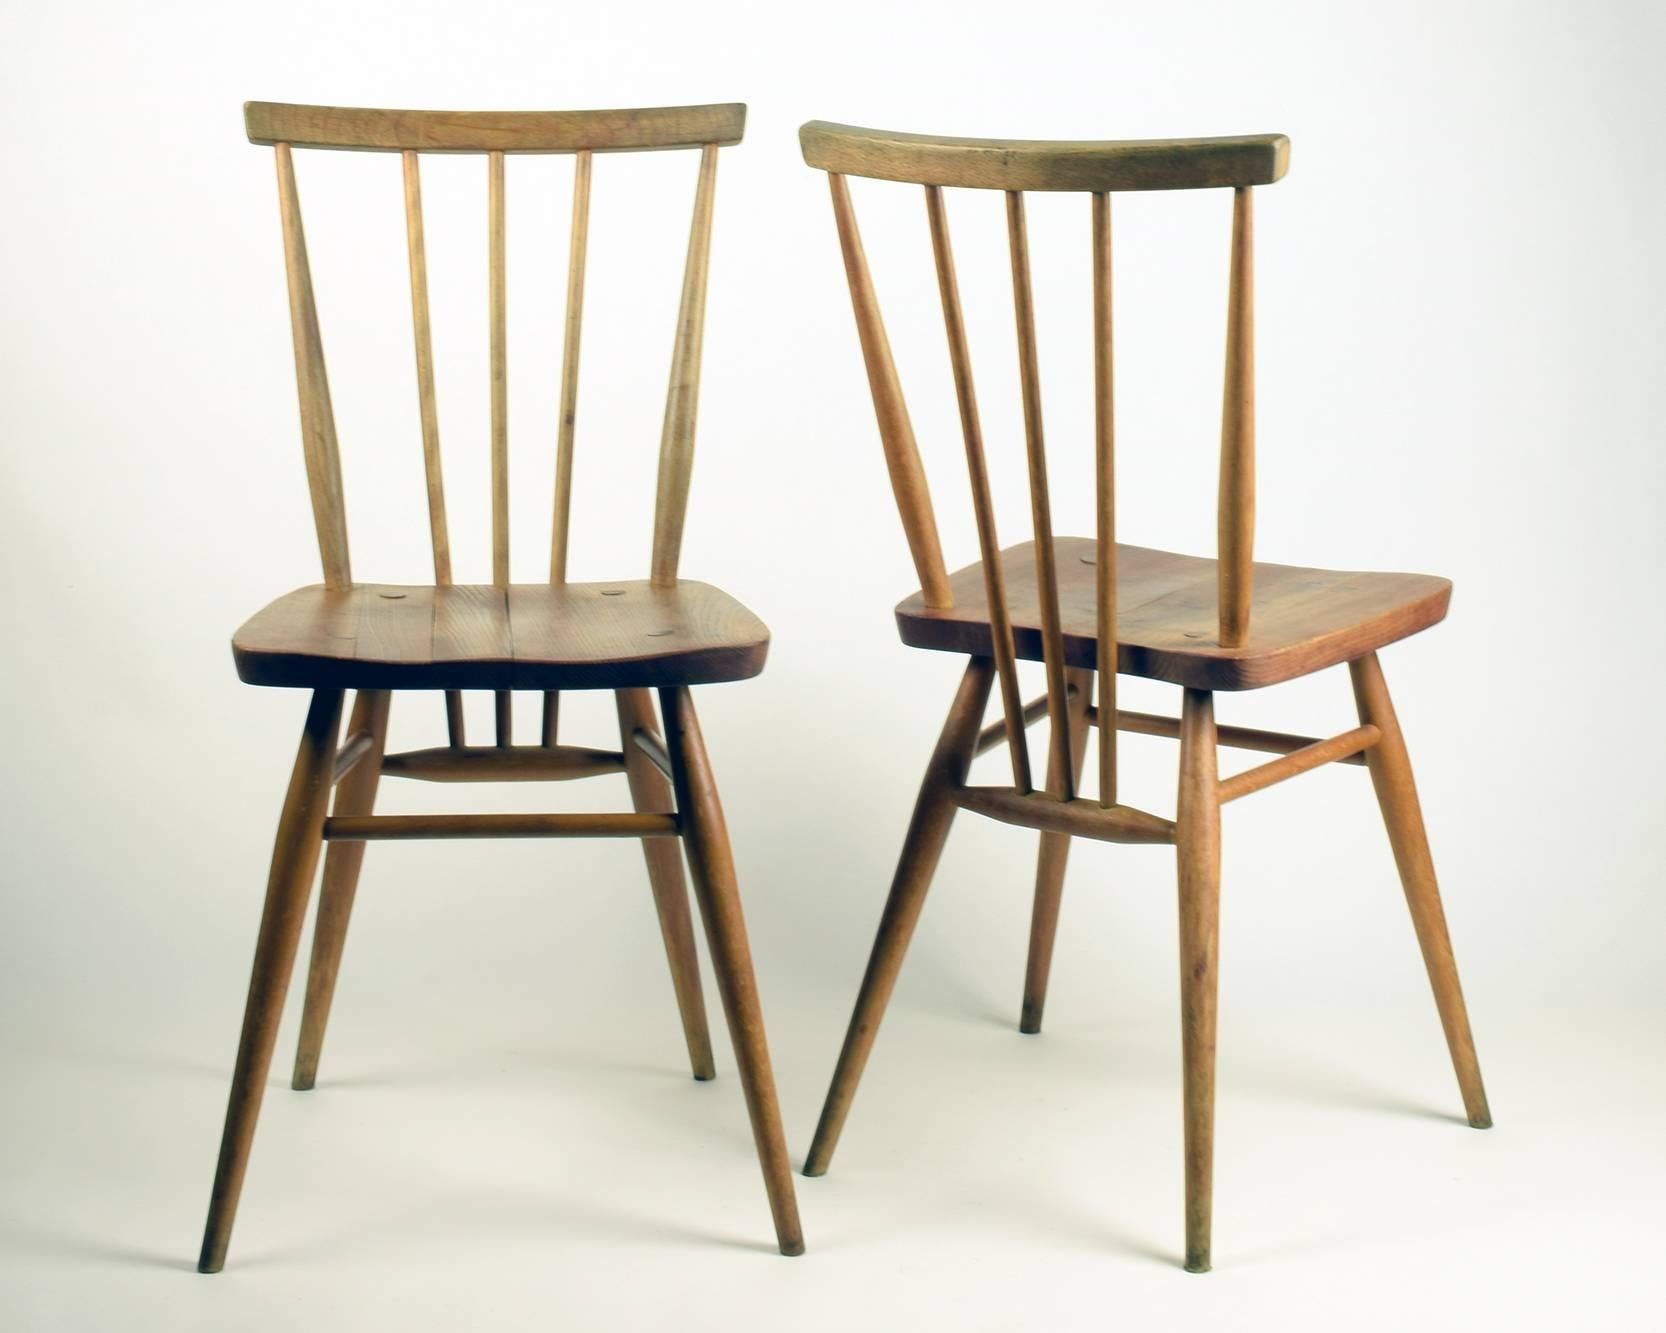 Lucian Ercolani for Ercol Furniture Ltd
Pair of 391 ‘Windsor’ chairs, designed 1950s/60s, these examples dating from 1979.
Solid elm and beech.
Original Ercol labels (showing date).
A good pair of these simple, elegant chairs, showing lovely patina